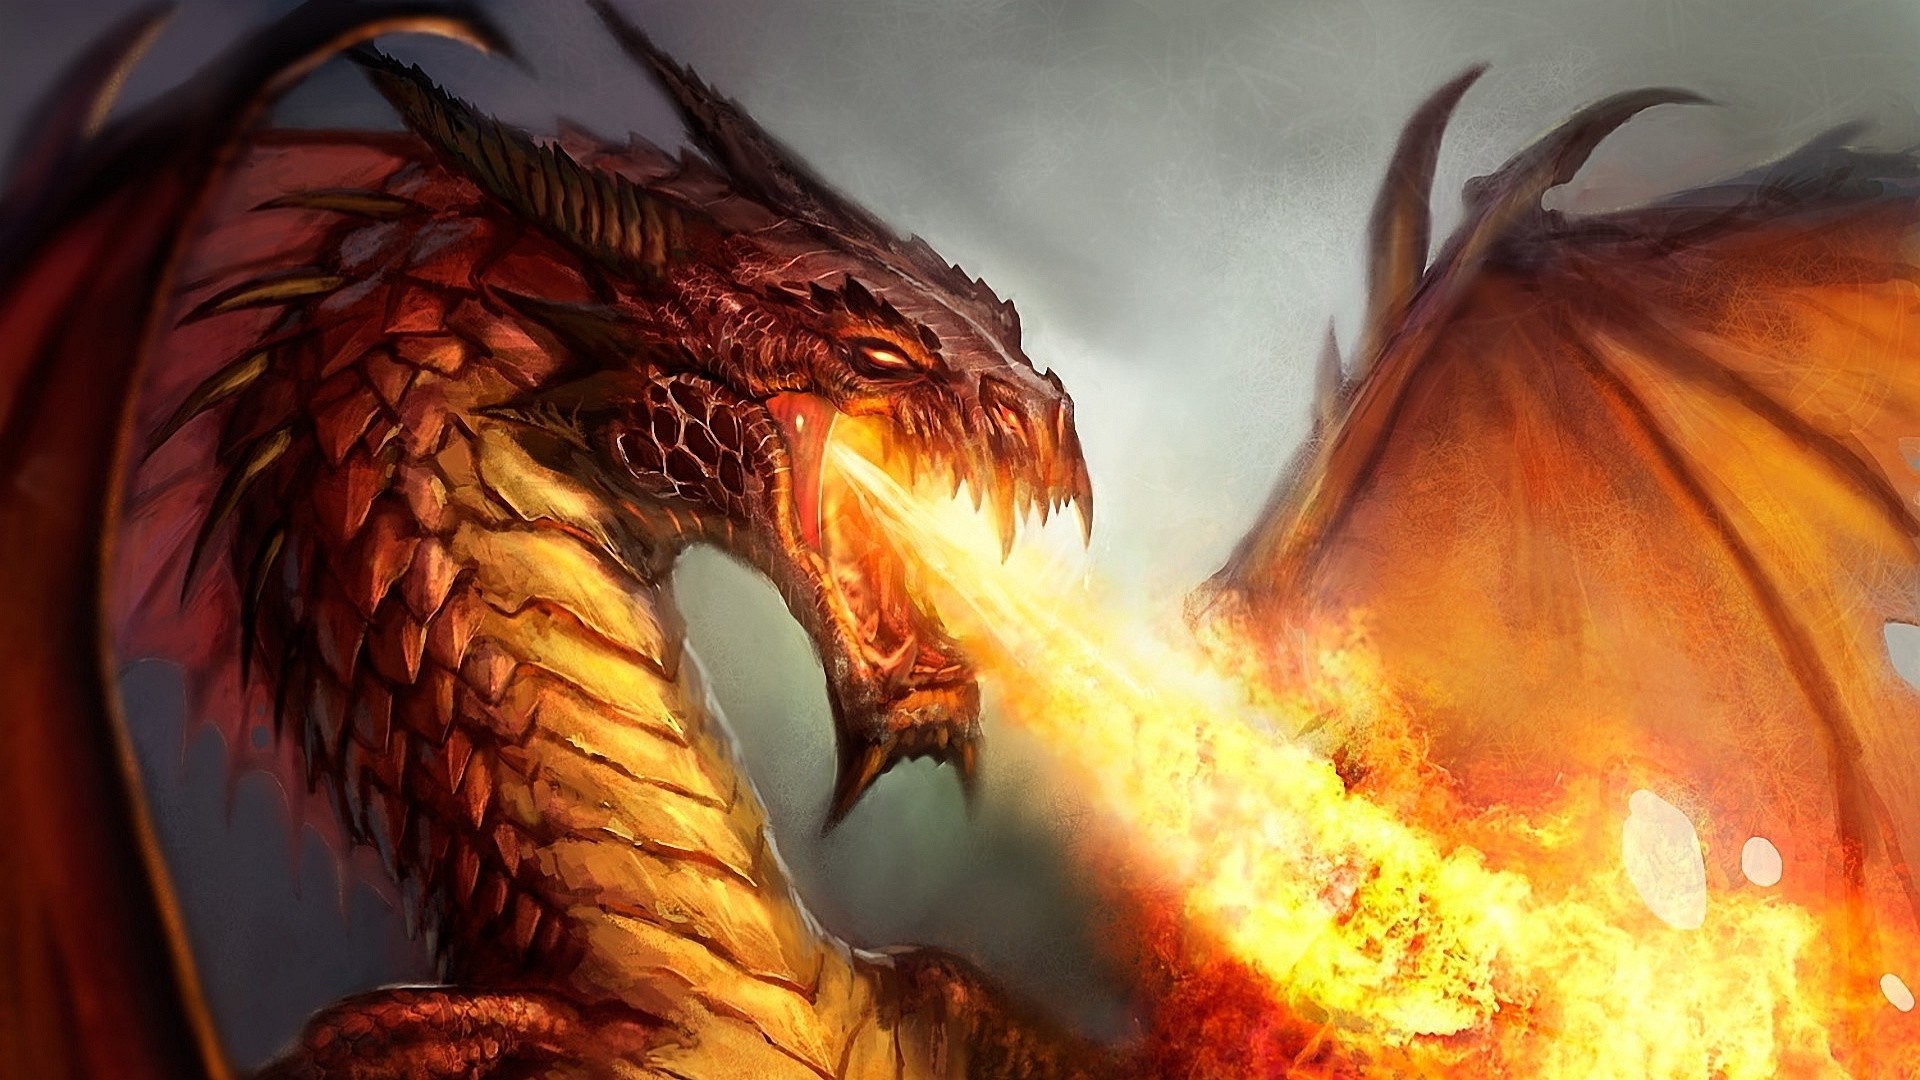 1920x1080 Backgrounds In High Quality: Dragon by Angle Sprowl, 05/03/2015